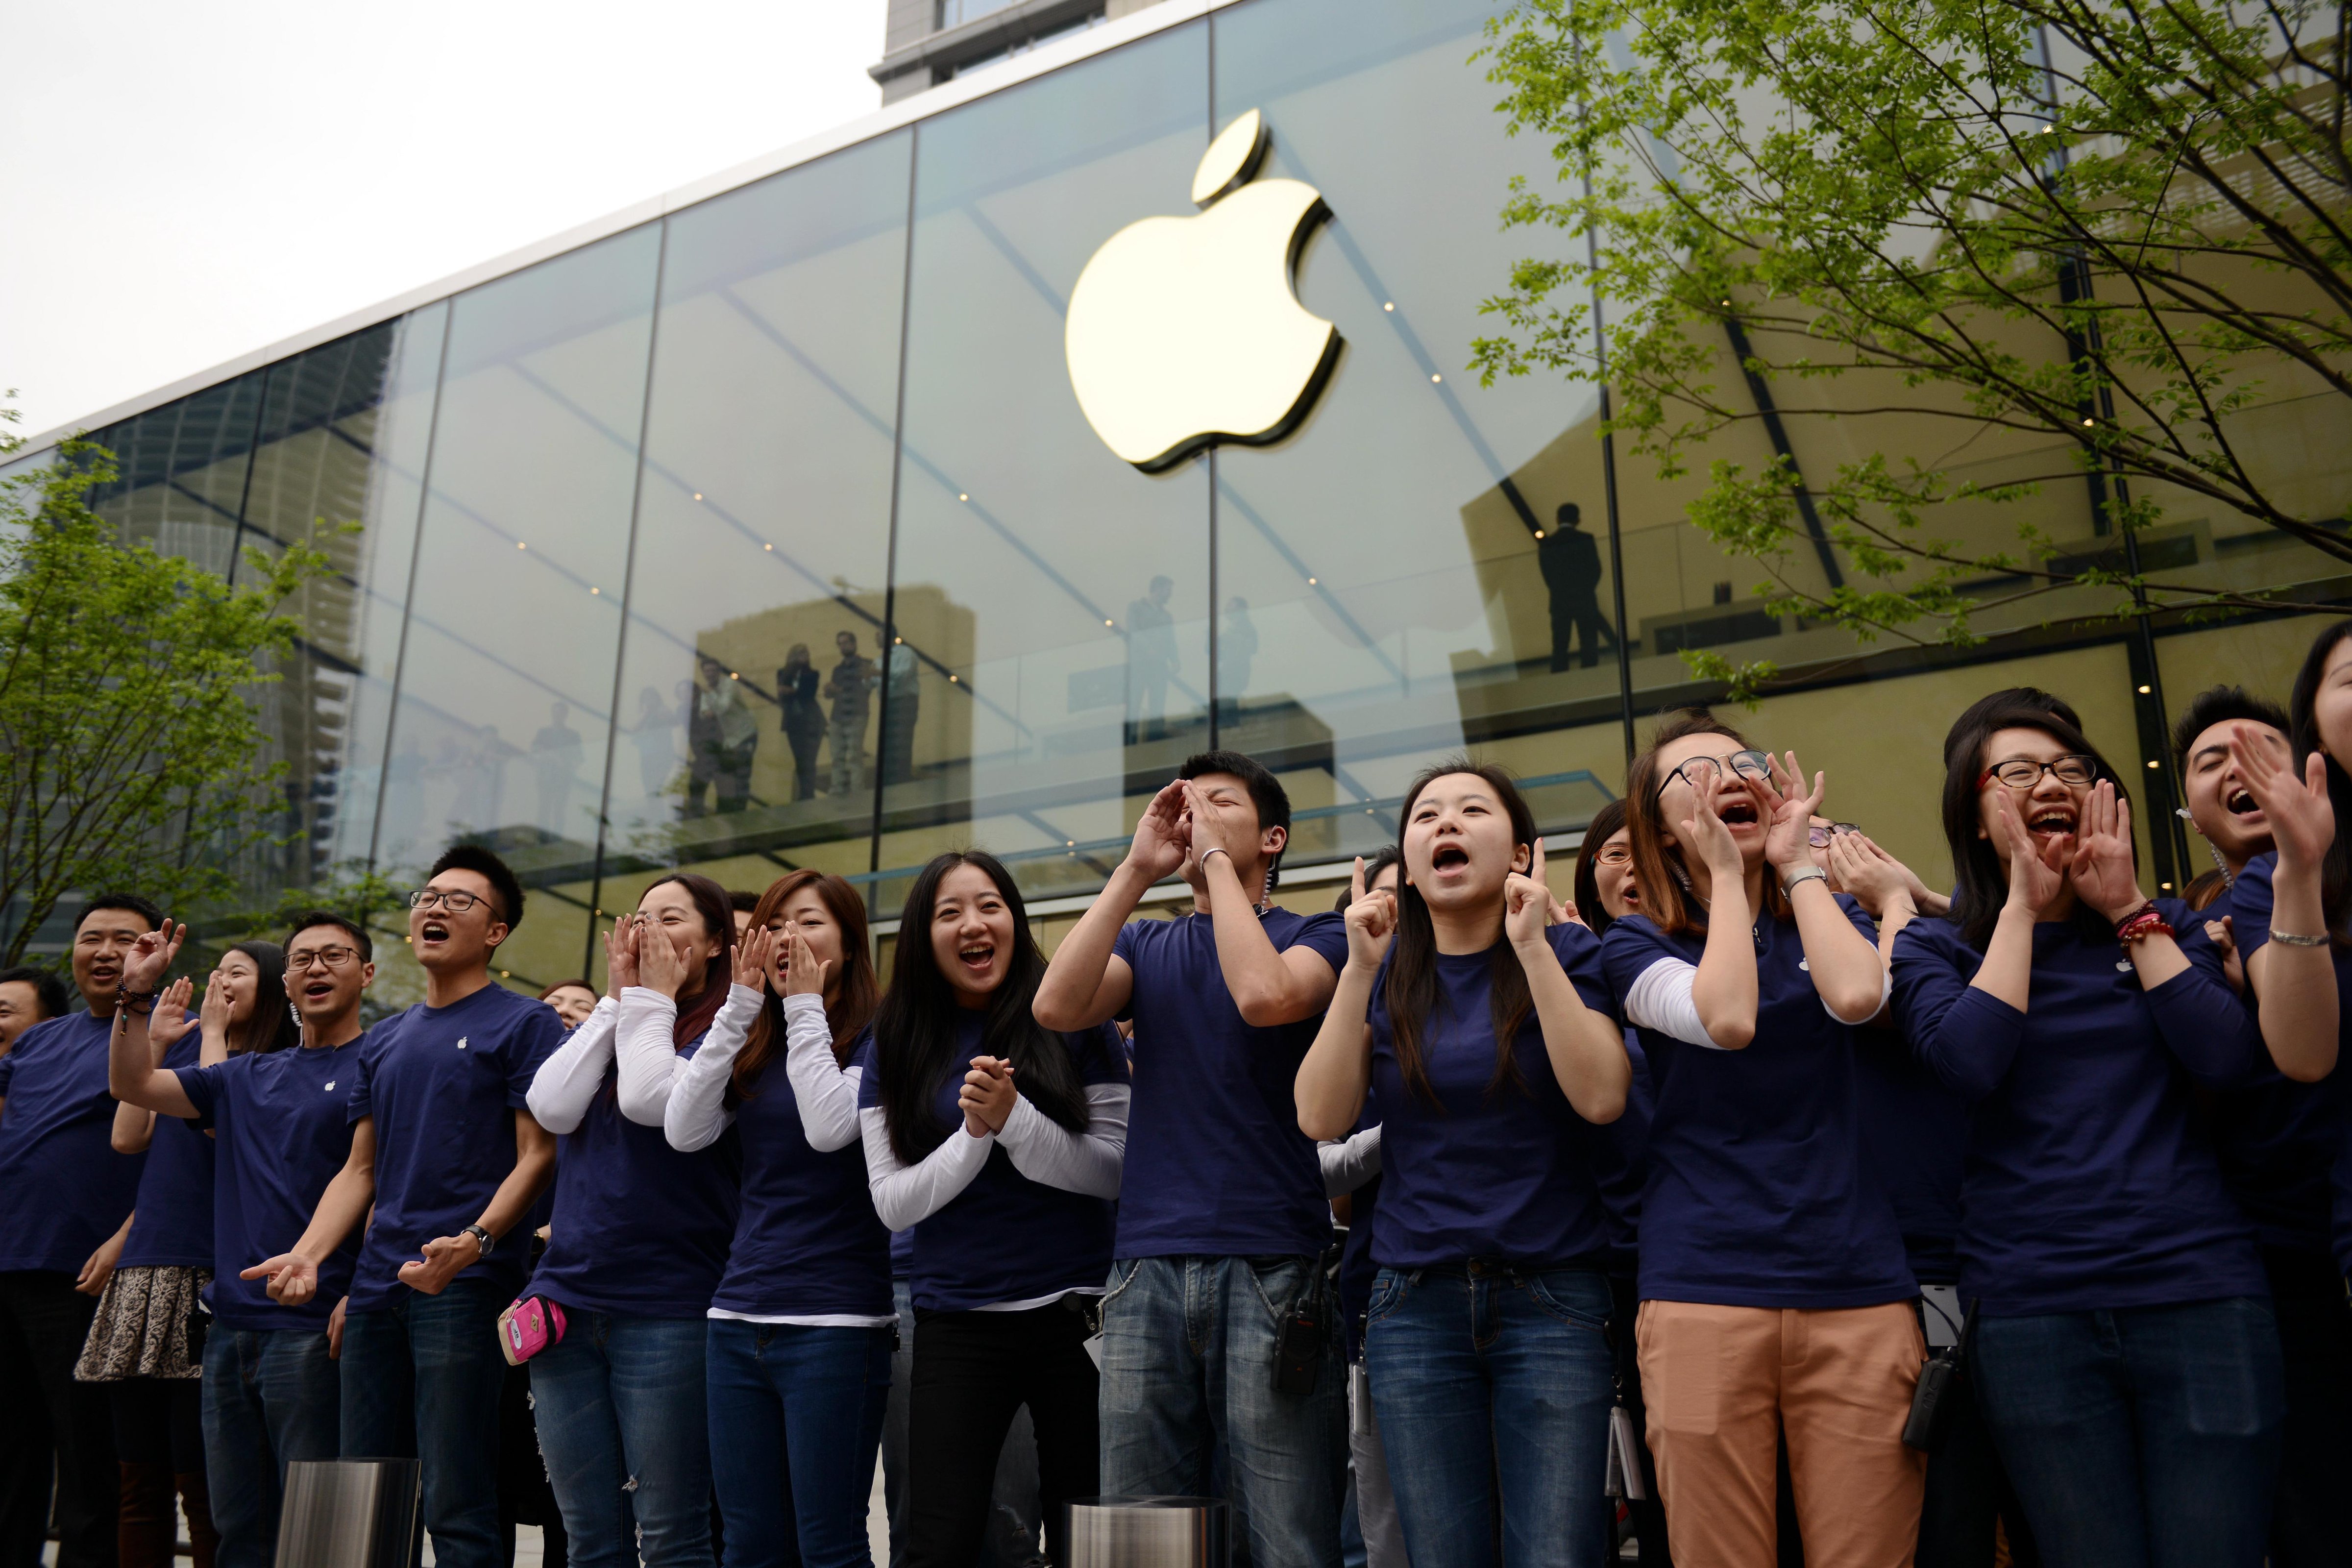 Apple Store assistants celebrate the second Apple Store open at the Mixc Mall on its first day open on April 24, 2015 in Hangzhou, Zhejiang province of China. (ChinaFotoPress&mdash;ChinaFotoPress via Getty Images)